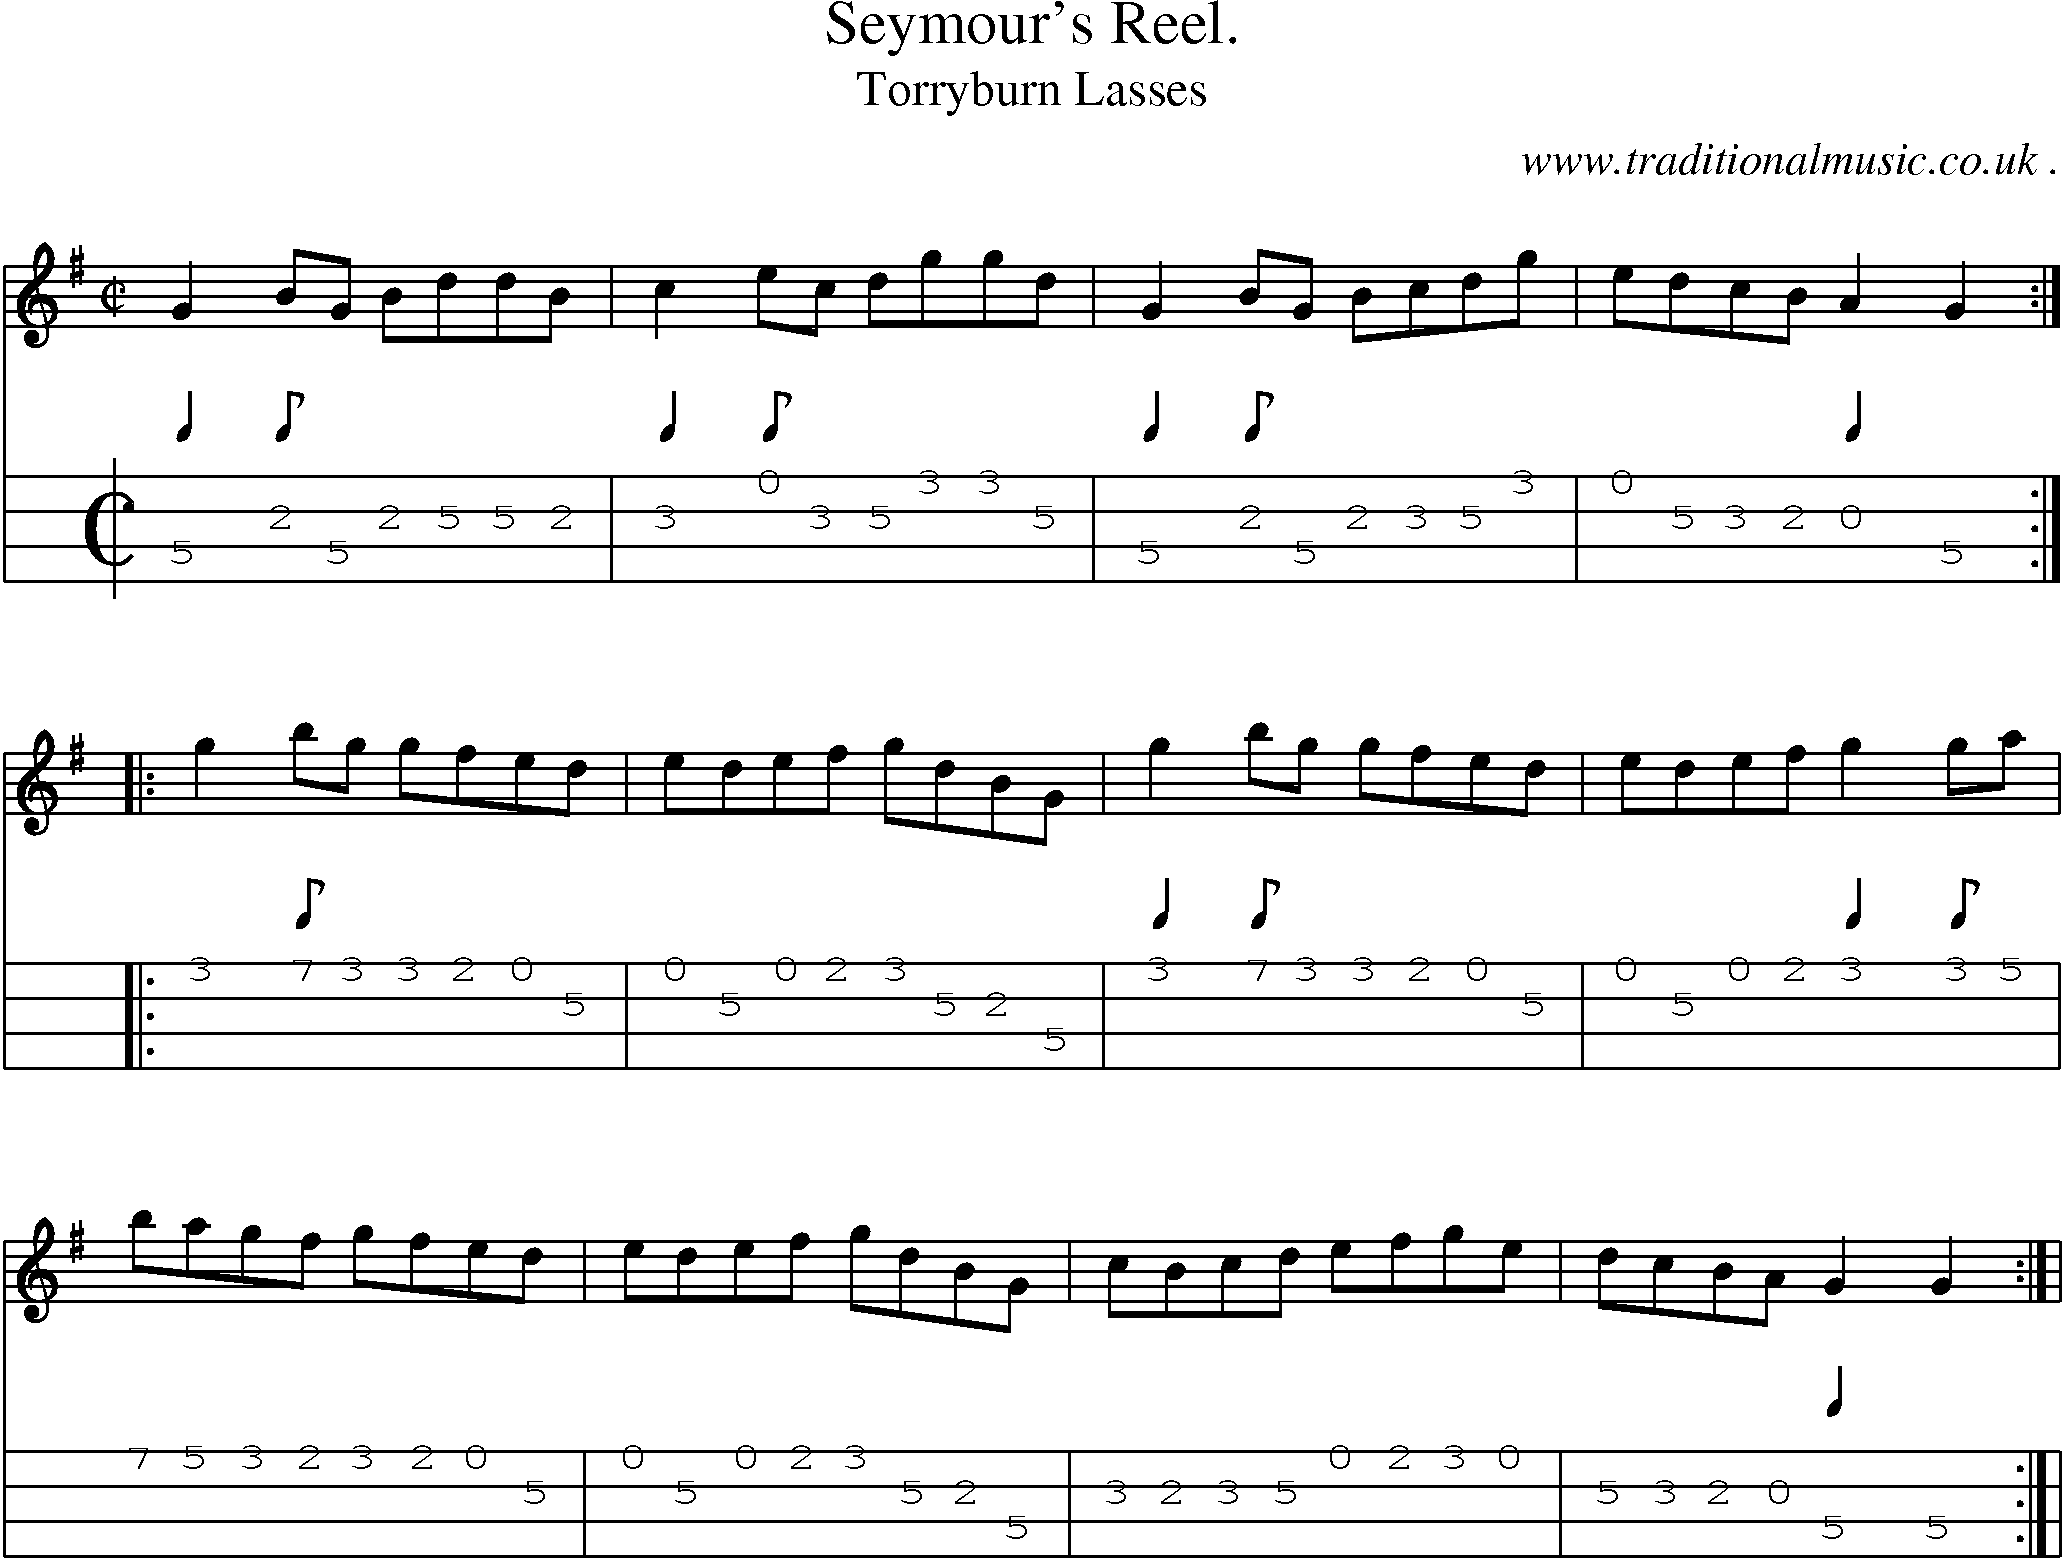 Sheet-Music and Mandolin Tabs for Seymours Reel